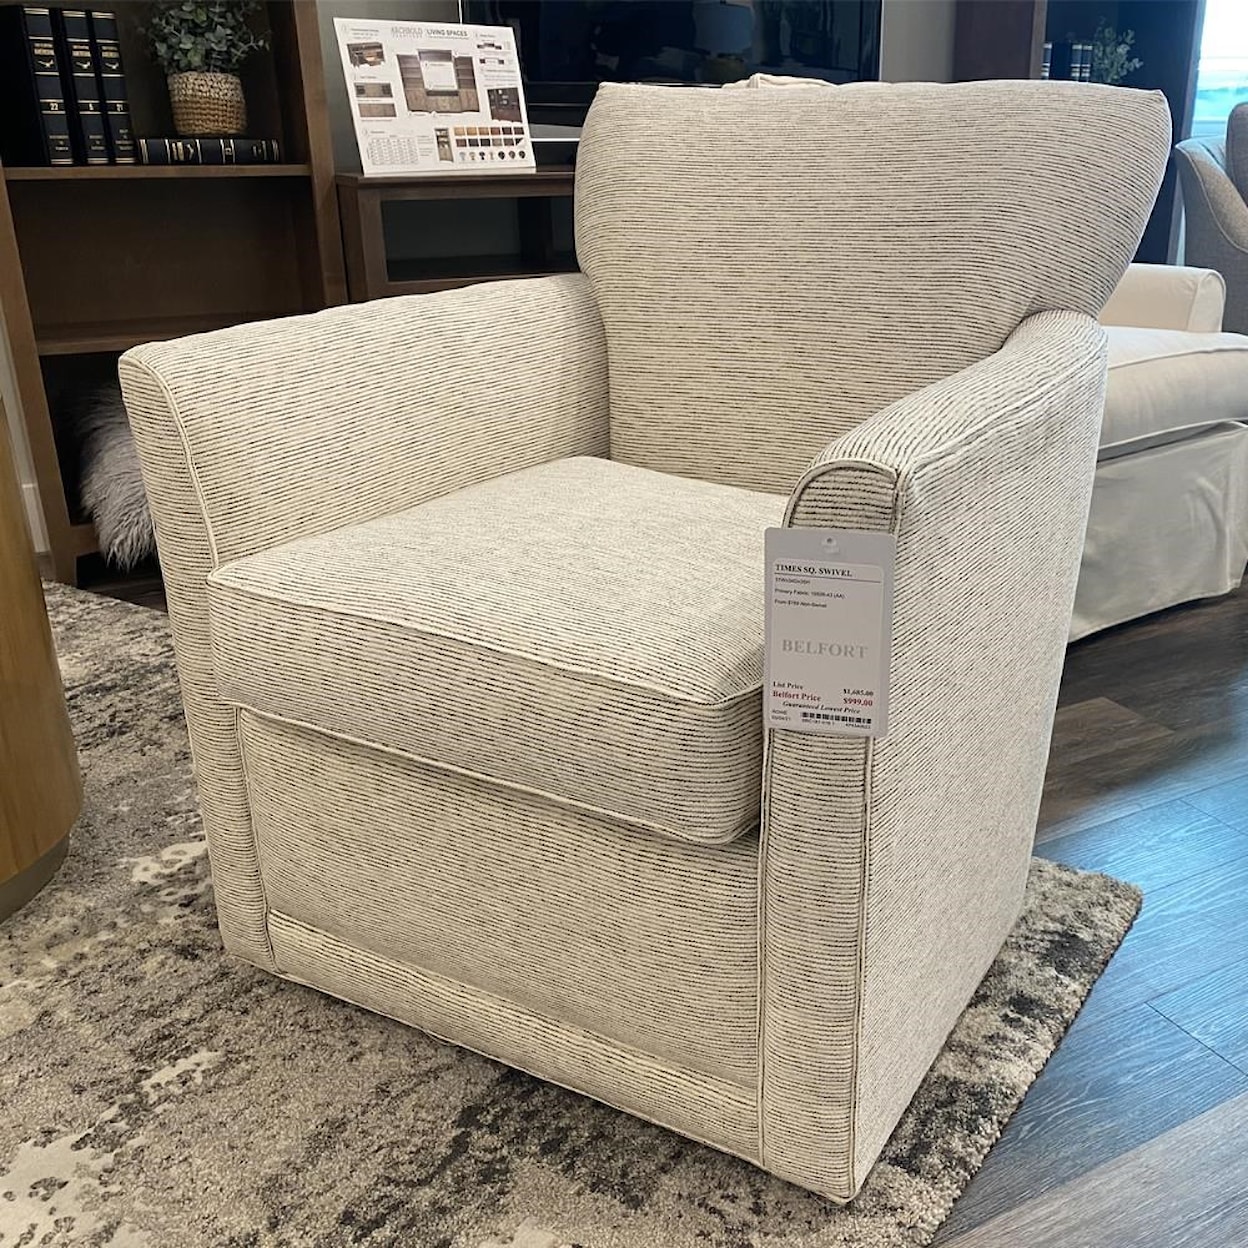 Rowe Times Square Swivel Chair